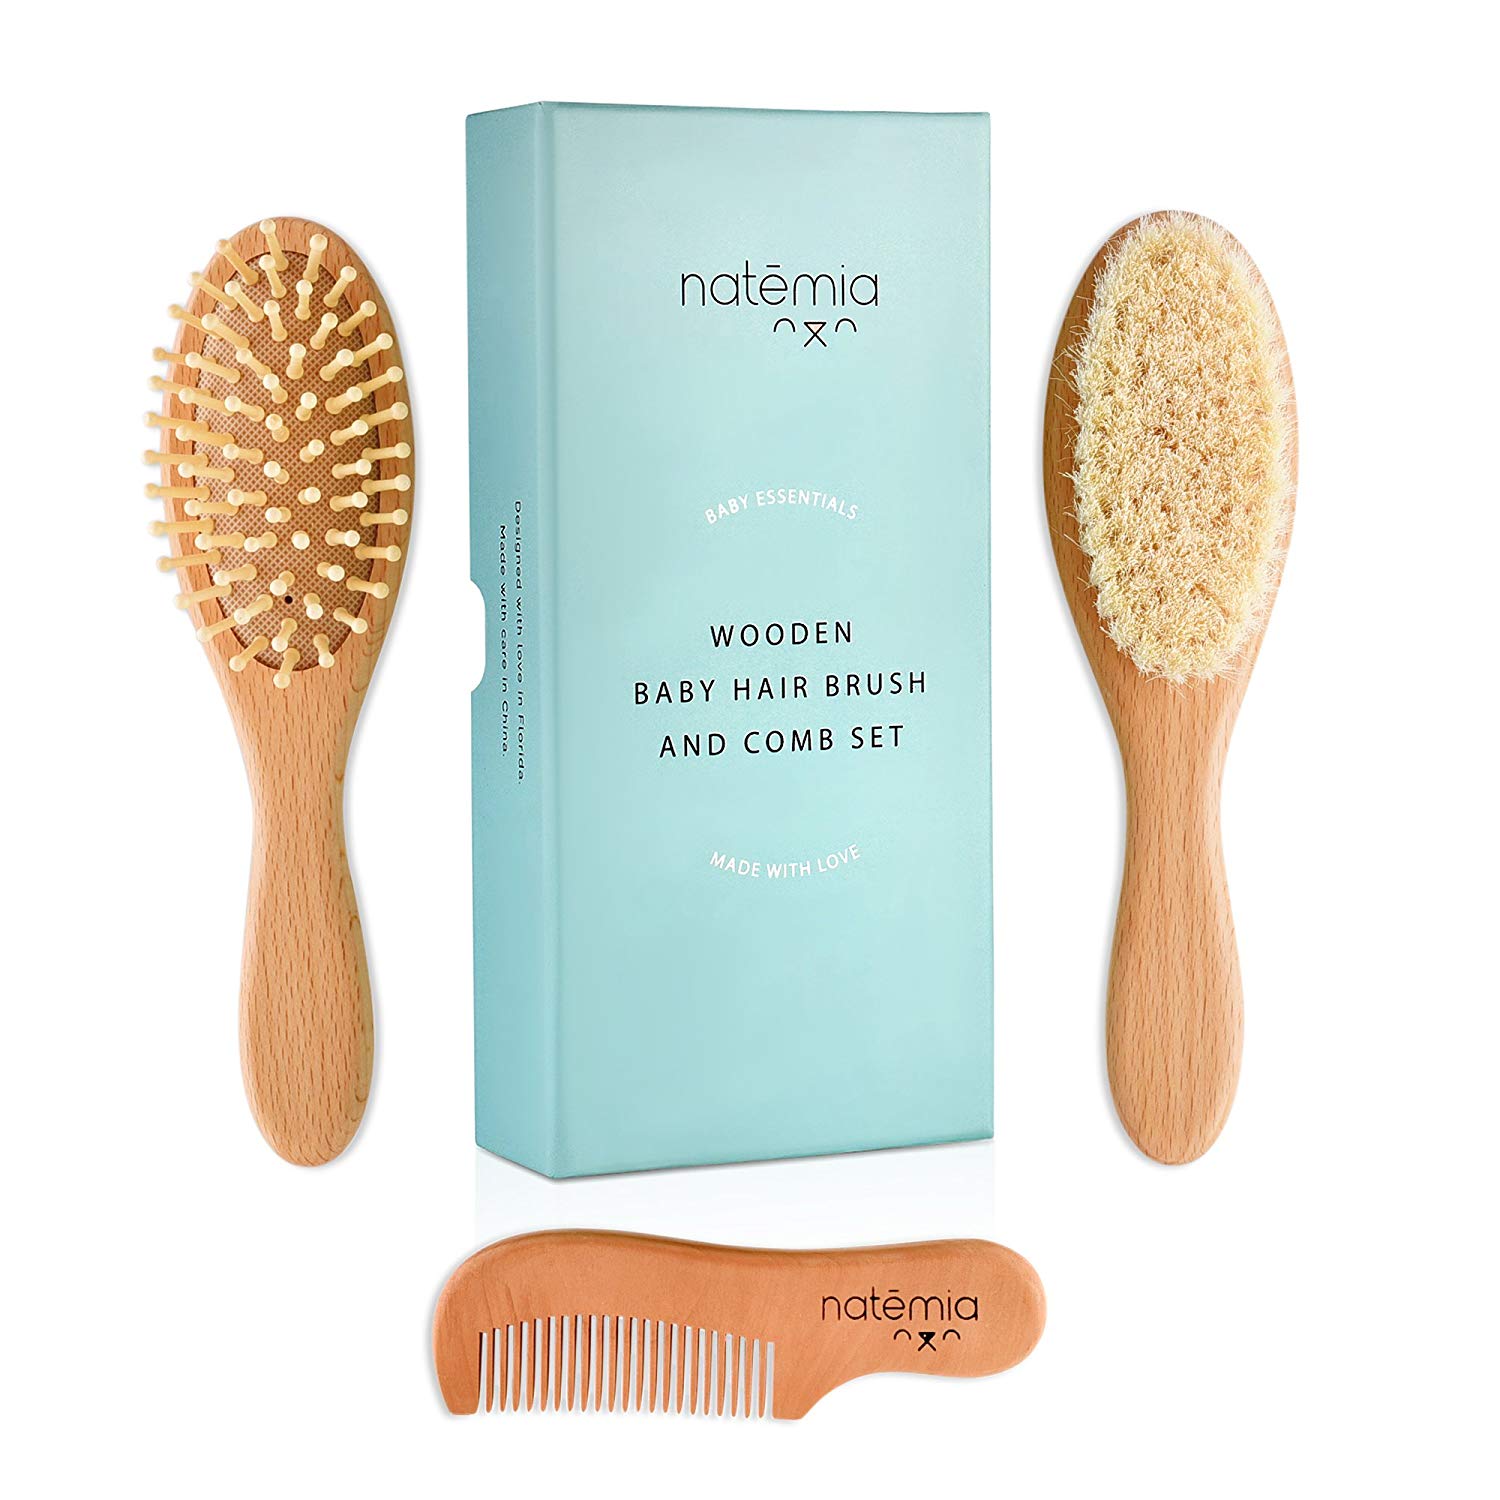 Natemia Premium Wooden Baby Hair Brush and Comb Set – Natural Soft Bristles – Ideal for Cradle Cap – Perfect Baby Registry Gift